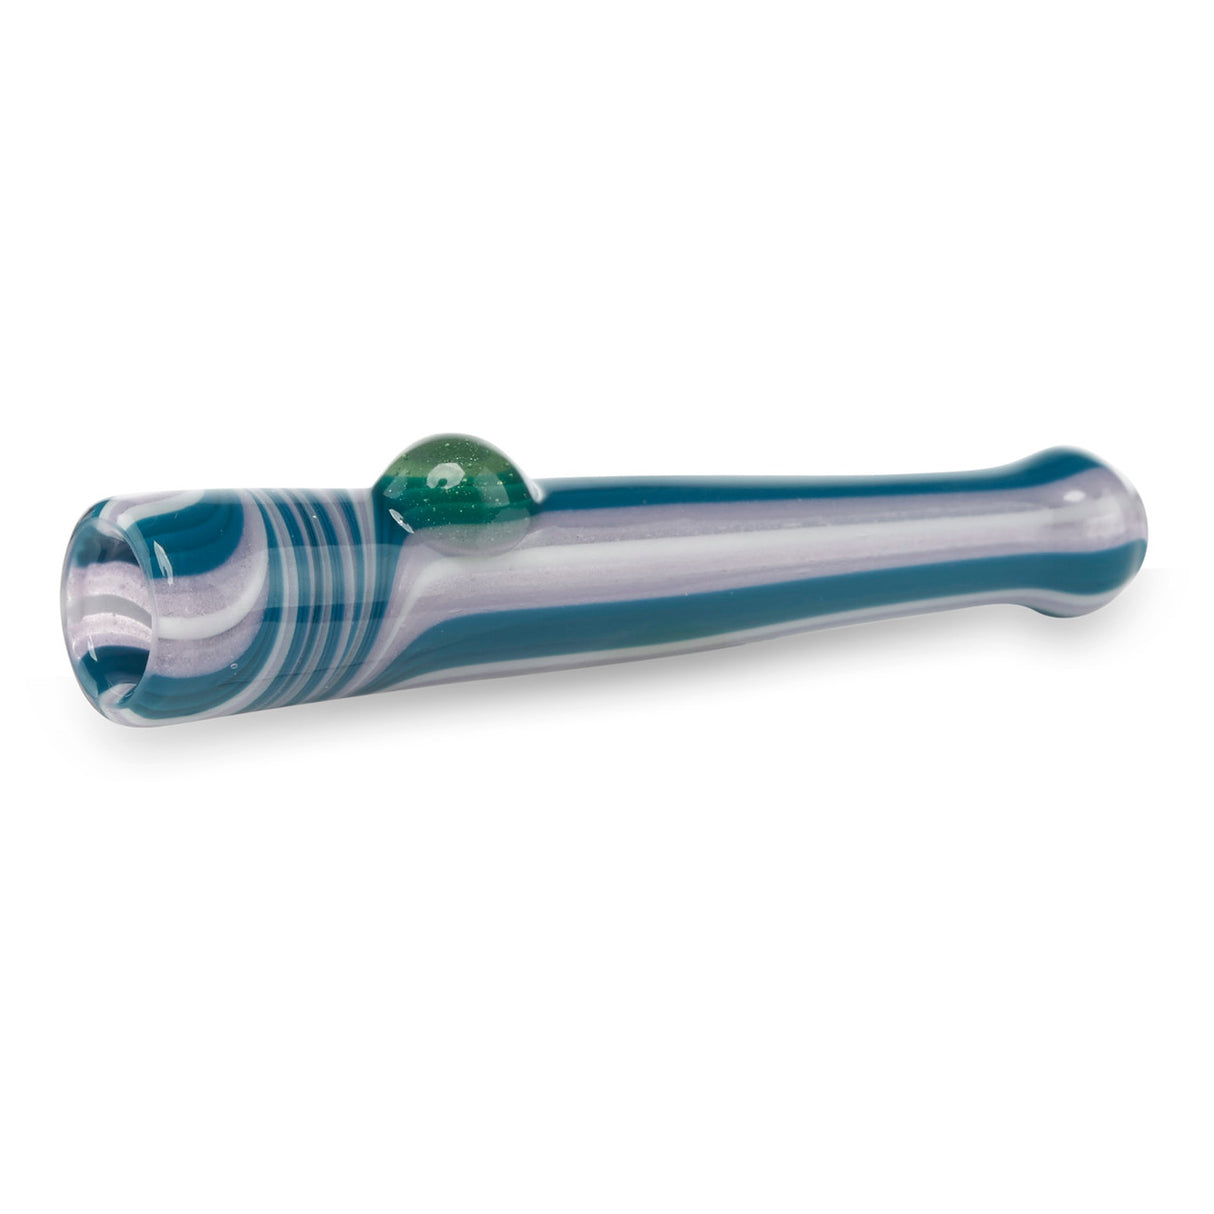 fully worked small glass one hitter chillum for smoking herbs